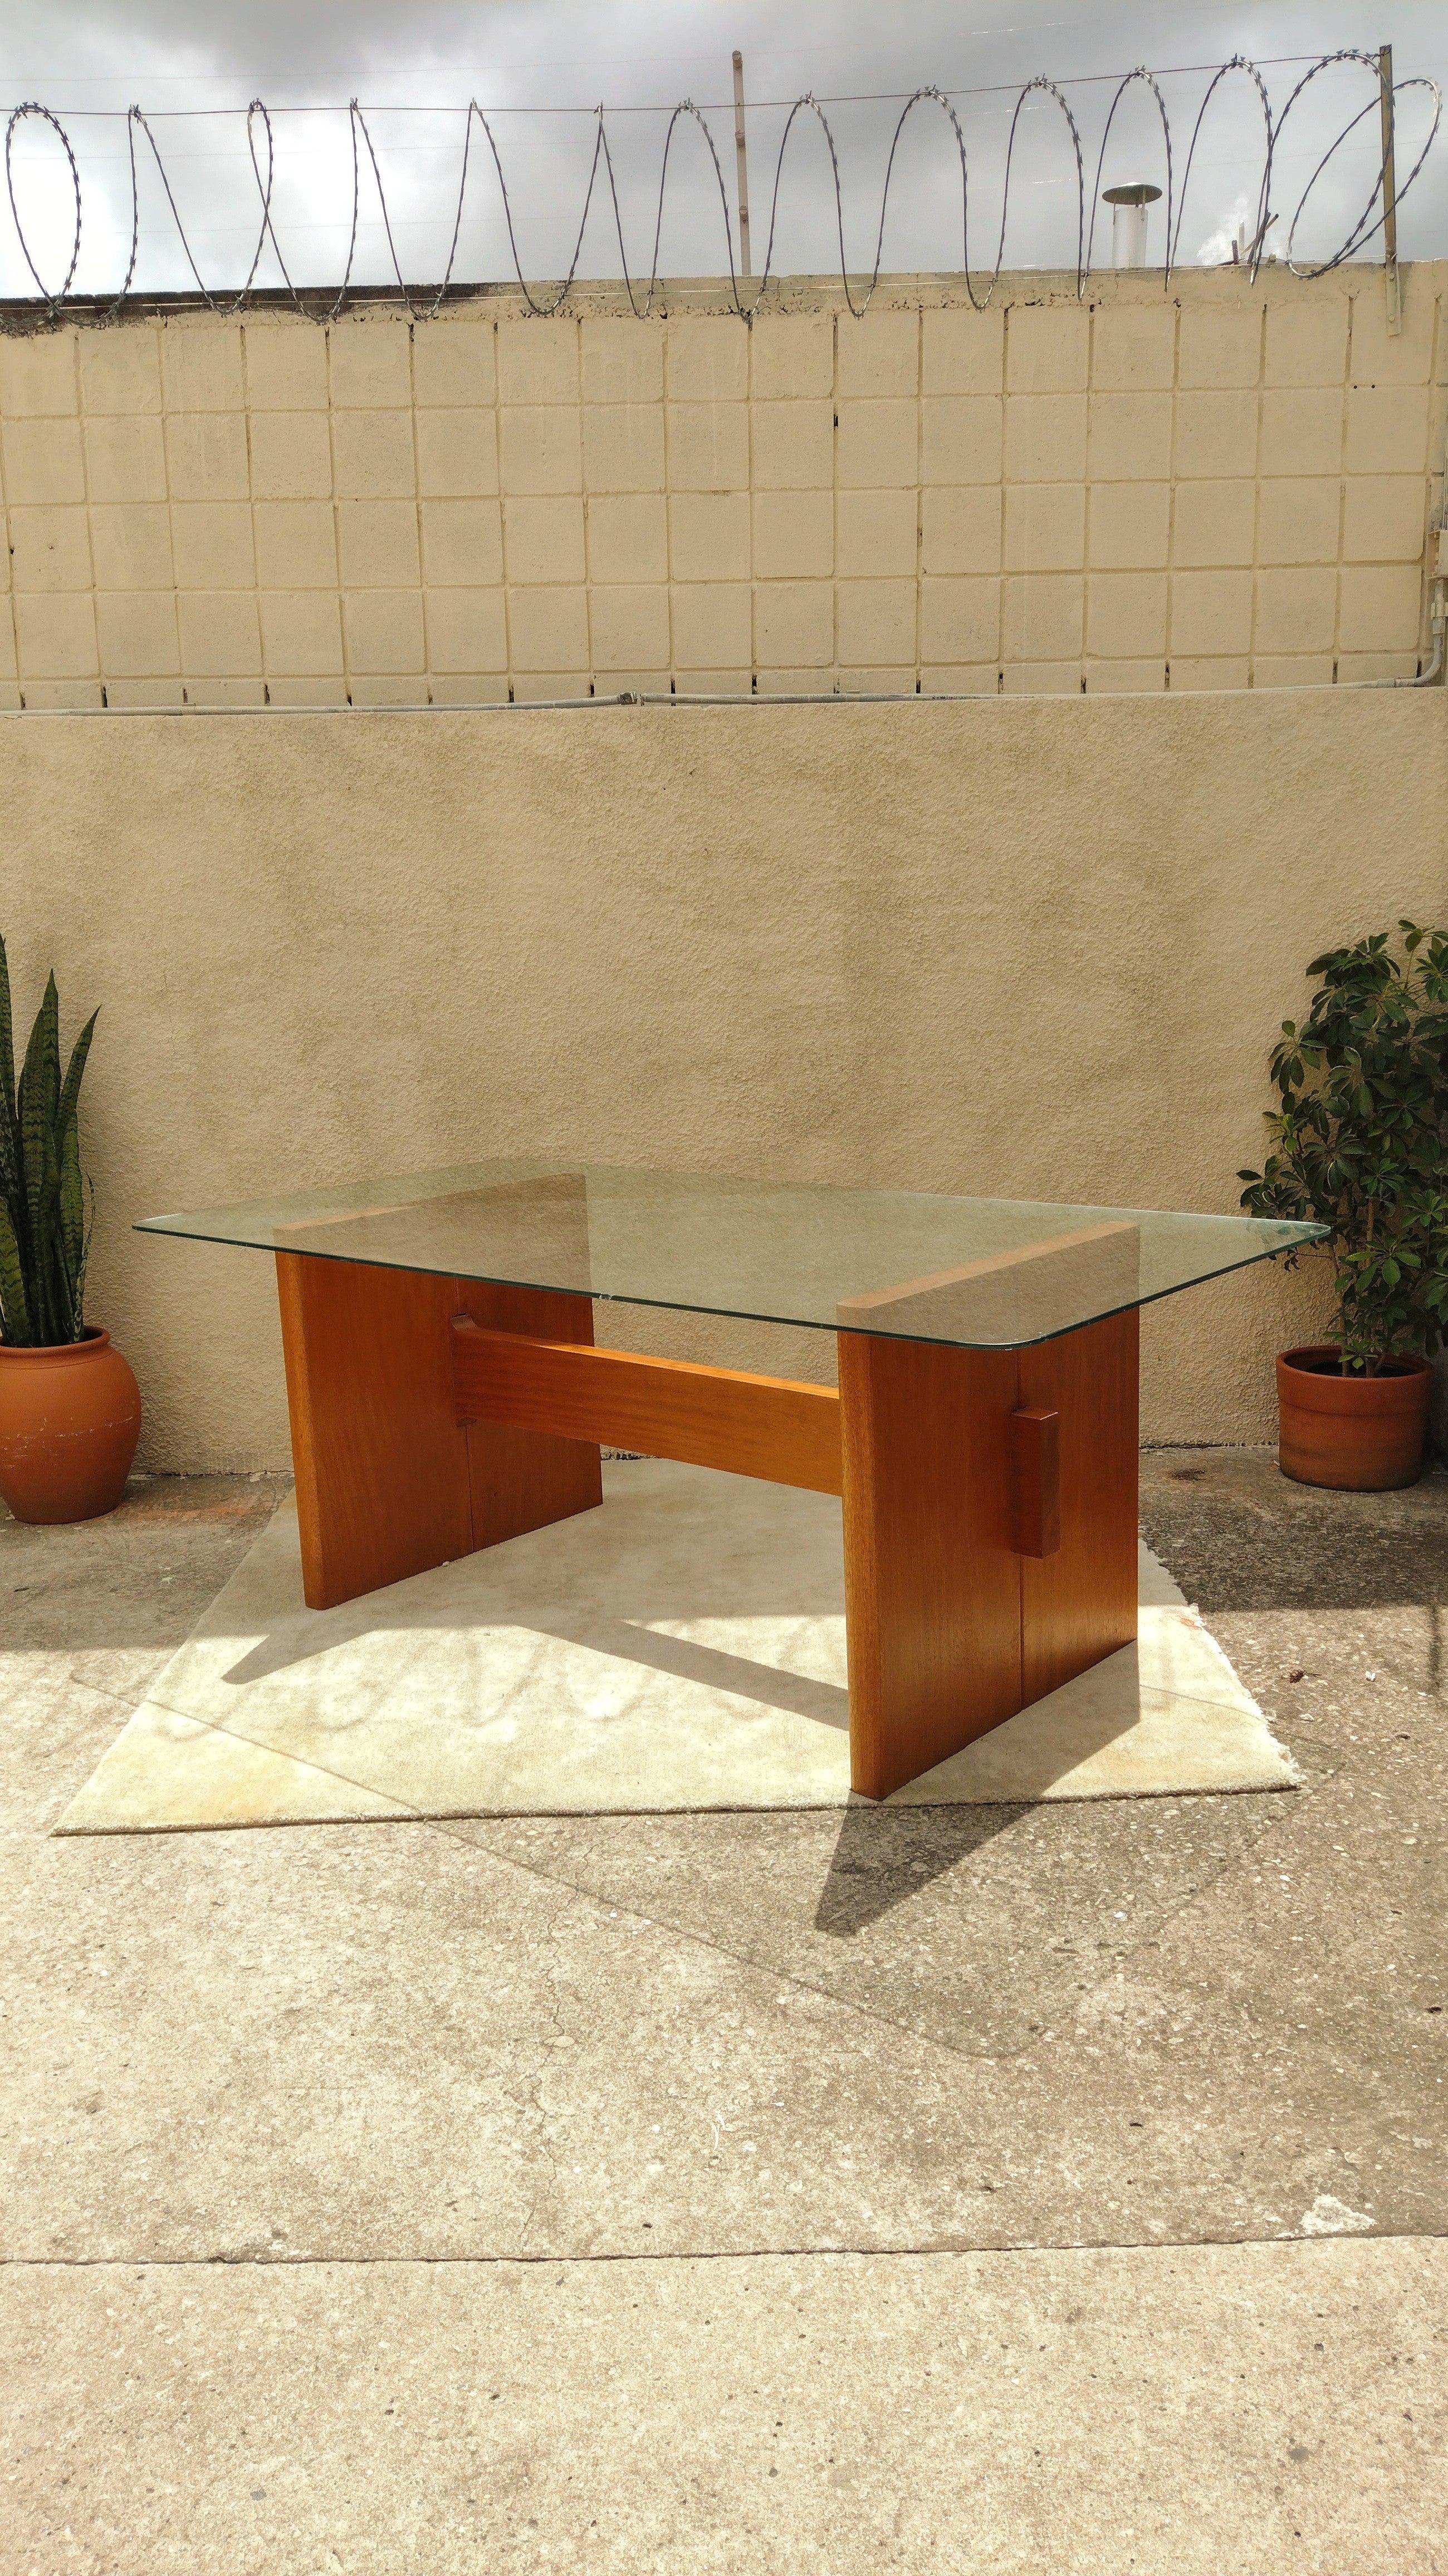 Modern Brazilian table from 1970s in solid cherrywood with tempered glass top. Firm and resistant structure. In good conditions.

Approximate measures:
Height: 81cm / Width: 216cm / Depth: 110cm

Main wear details:*
-Glass has scratches along